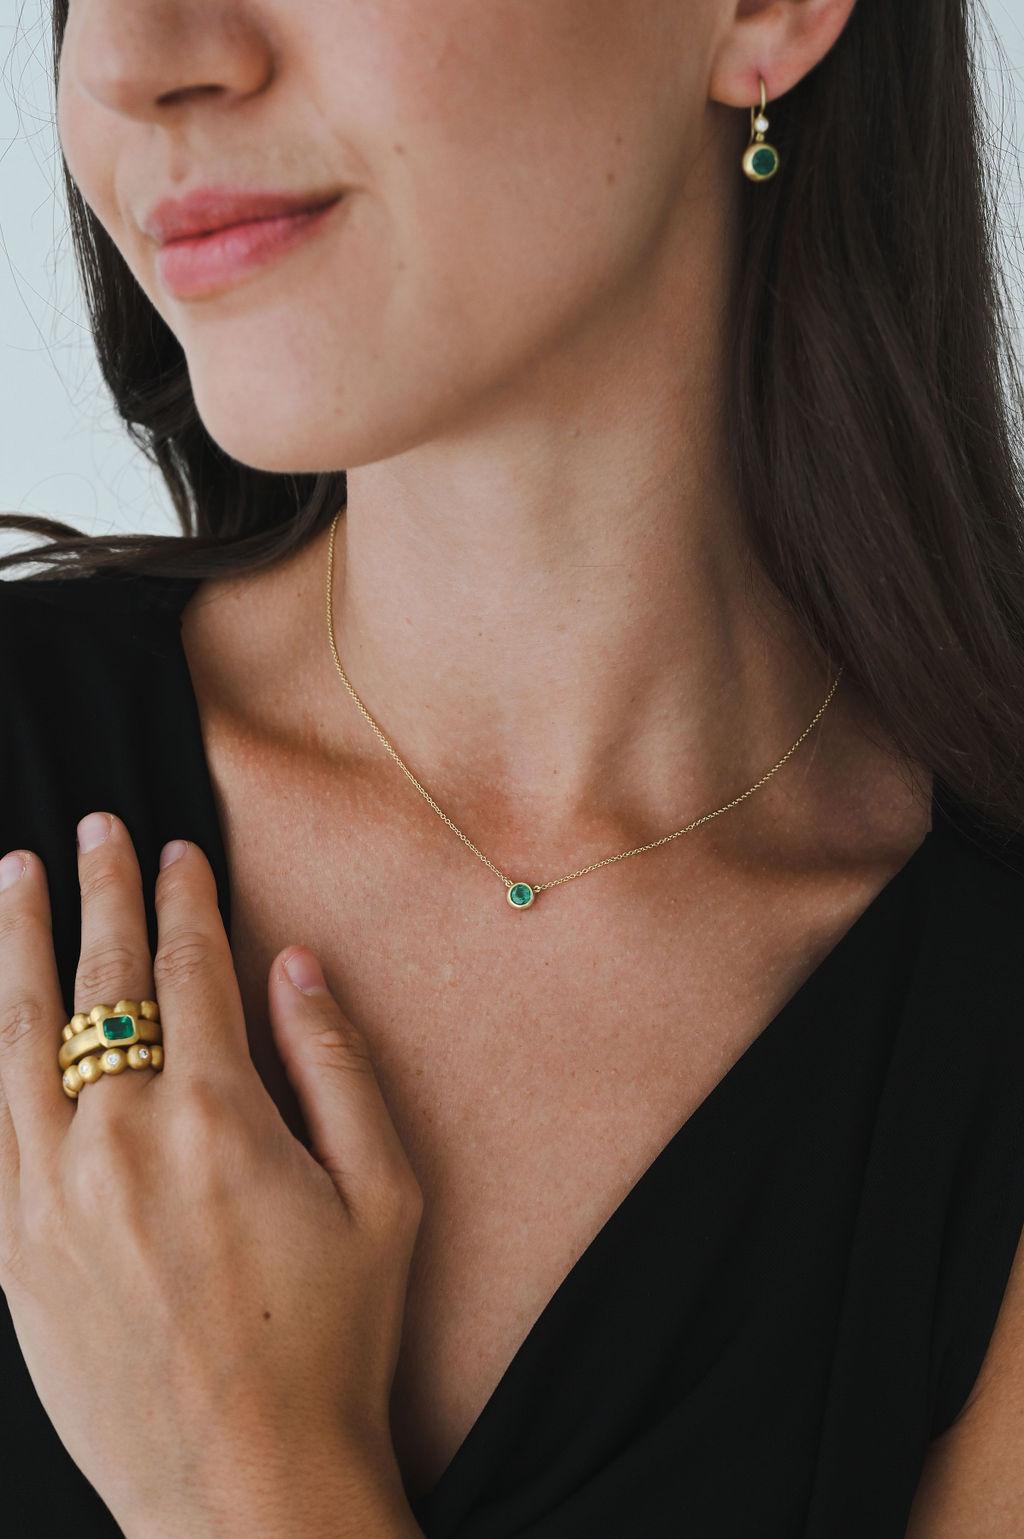 One of a kind and handcrafted in 18 karat gold, Faye Kim's Emerald Bezel Pendant Necklace is matte finished and perfect for layering with other necklaces or wearing alone. This piece is sure to become one of your go-to favorites!

Emerald .45